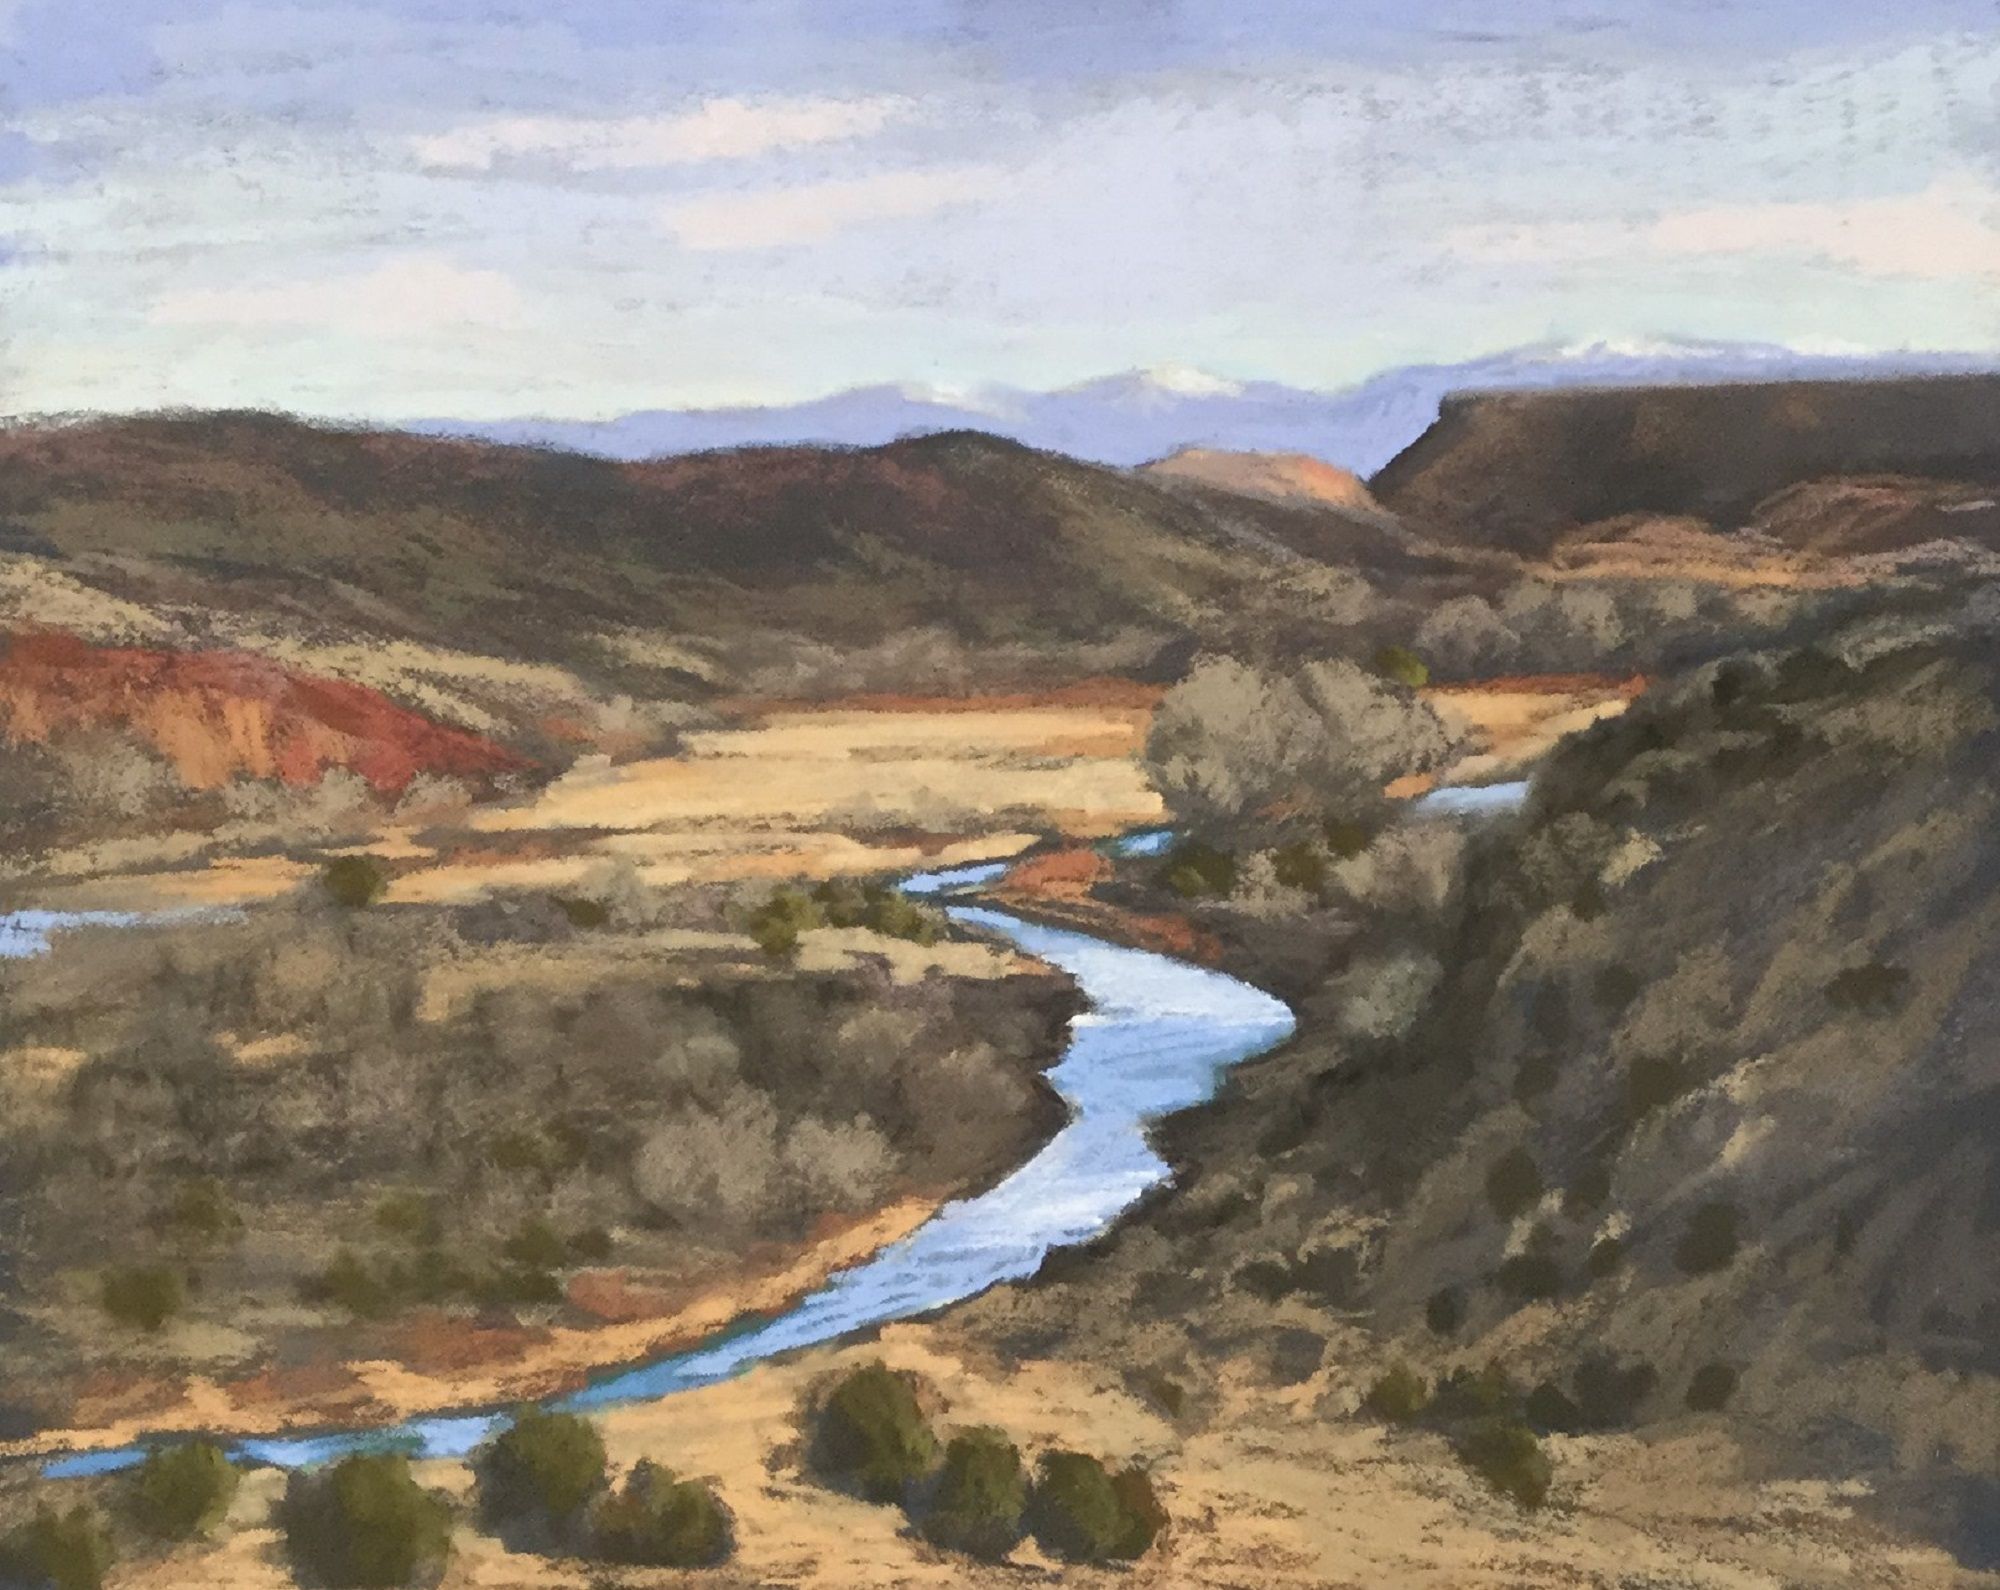 Overlooking the Chama by Nancy Silvia.